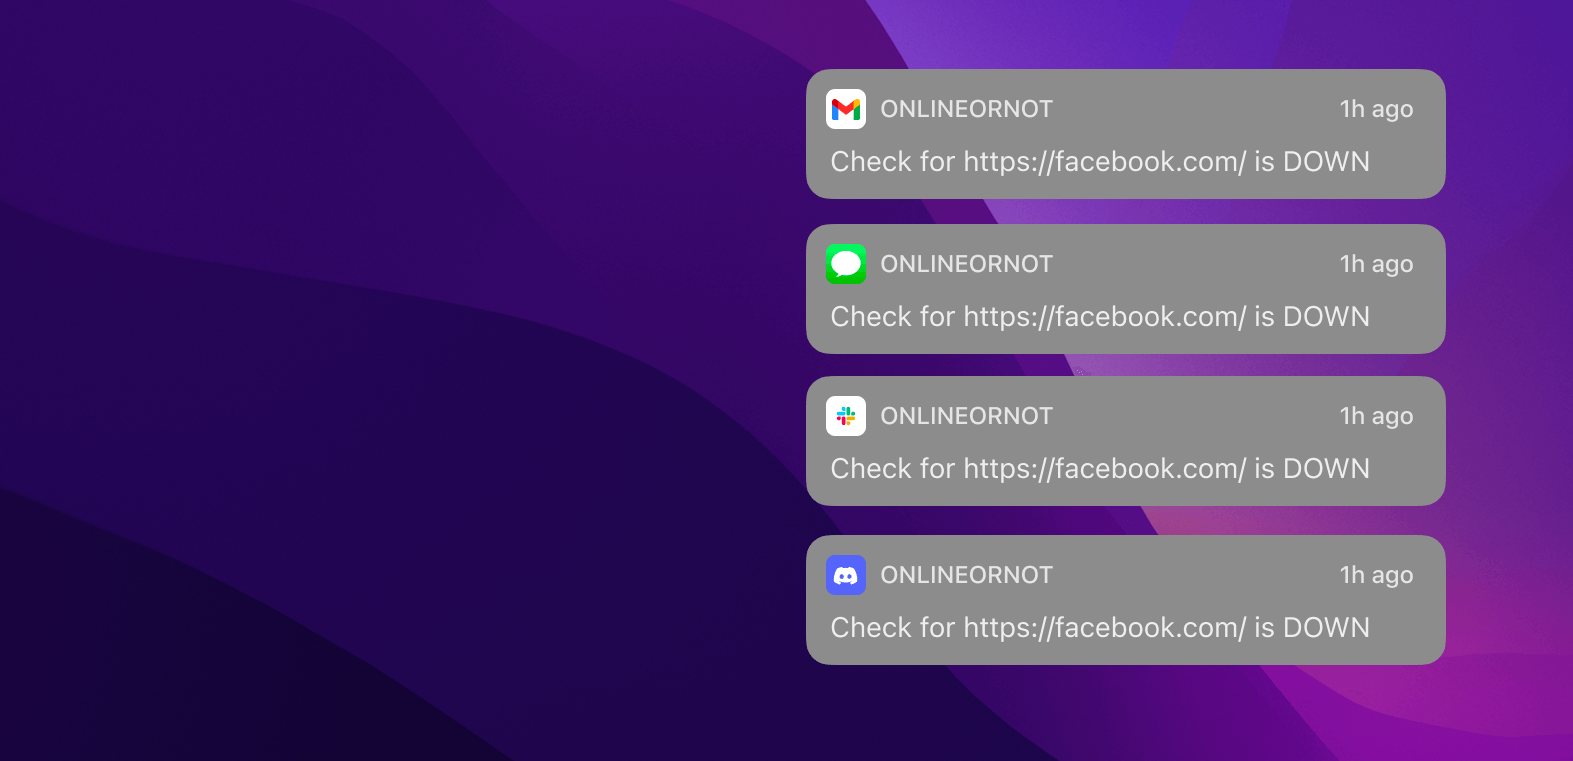 OnlineOrNot sends alerts via Email, SMS, Slack, Discord, Webhooks, and more to come.